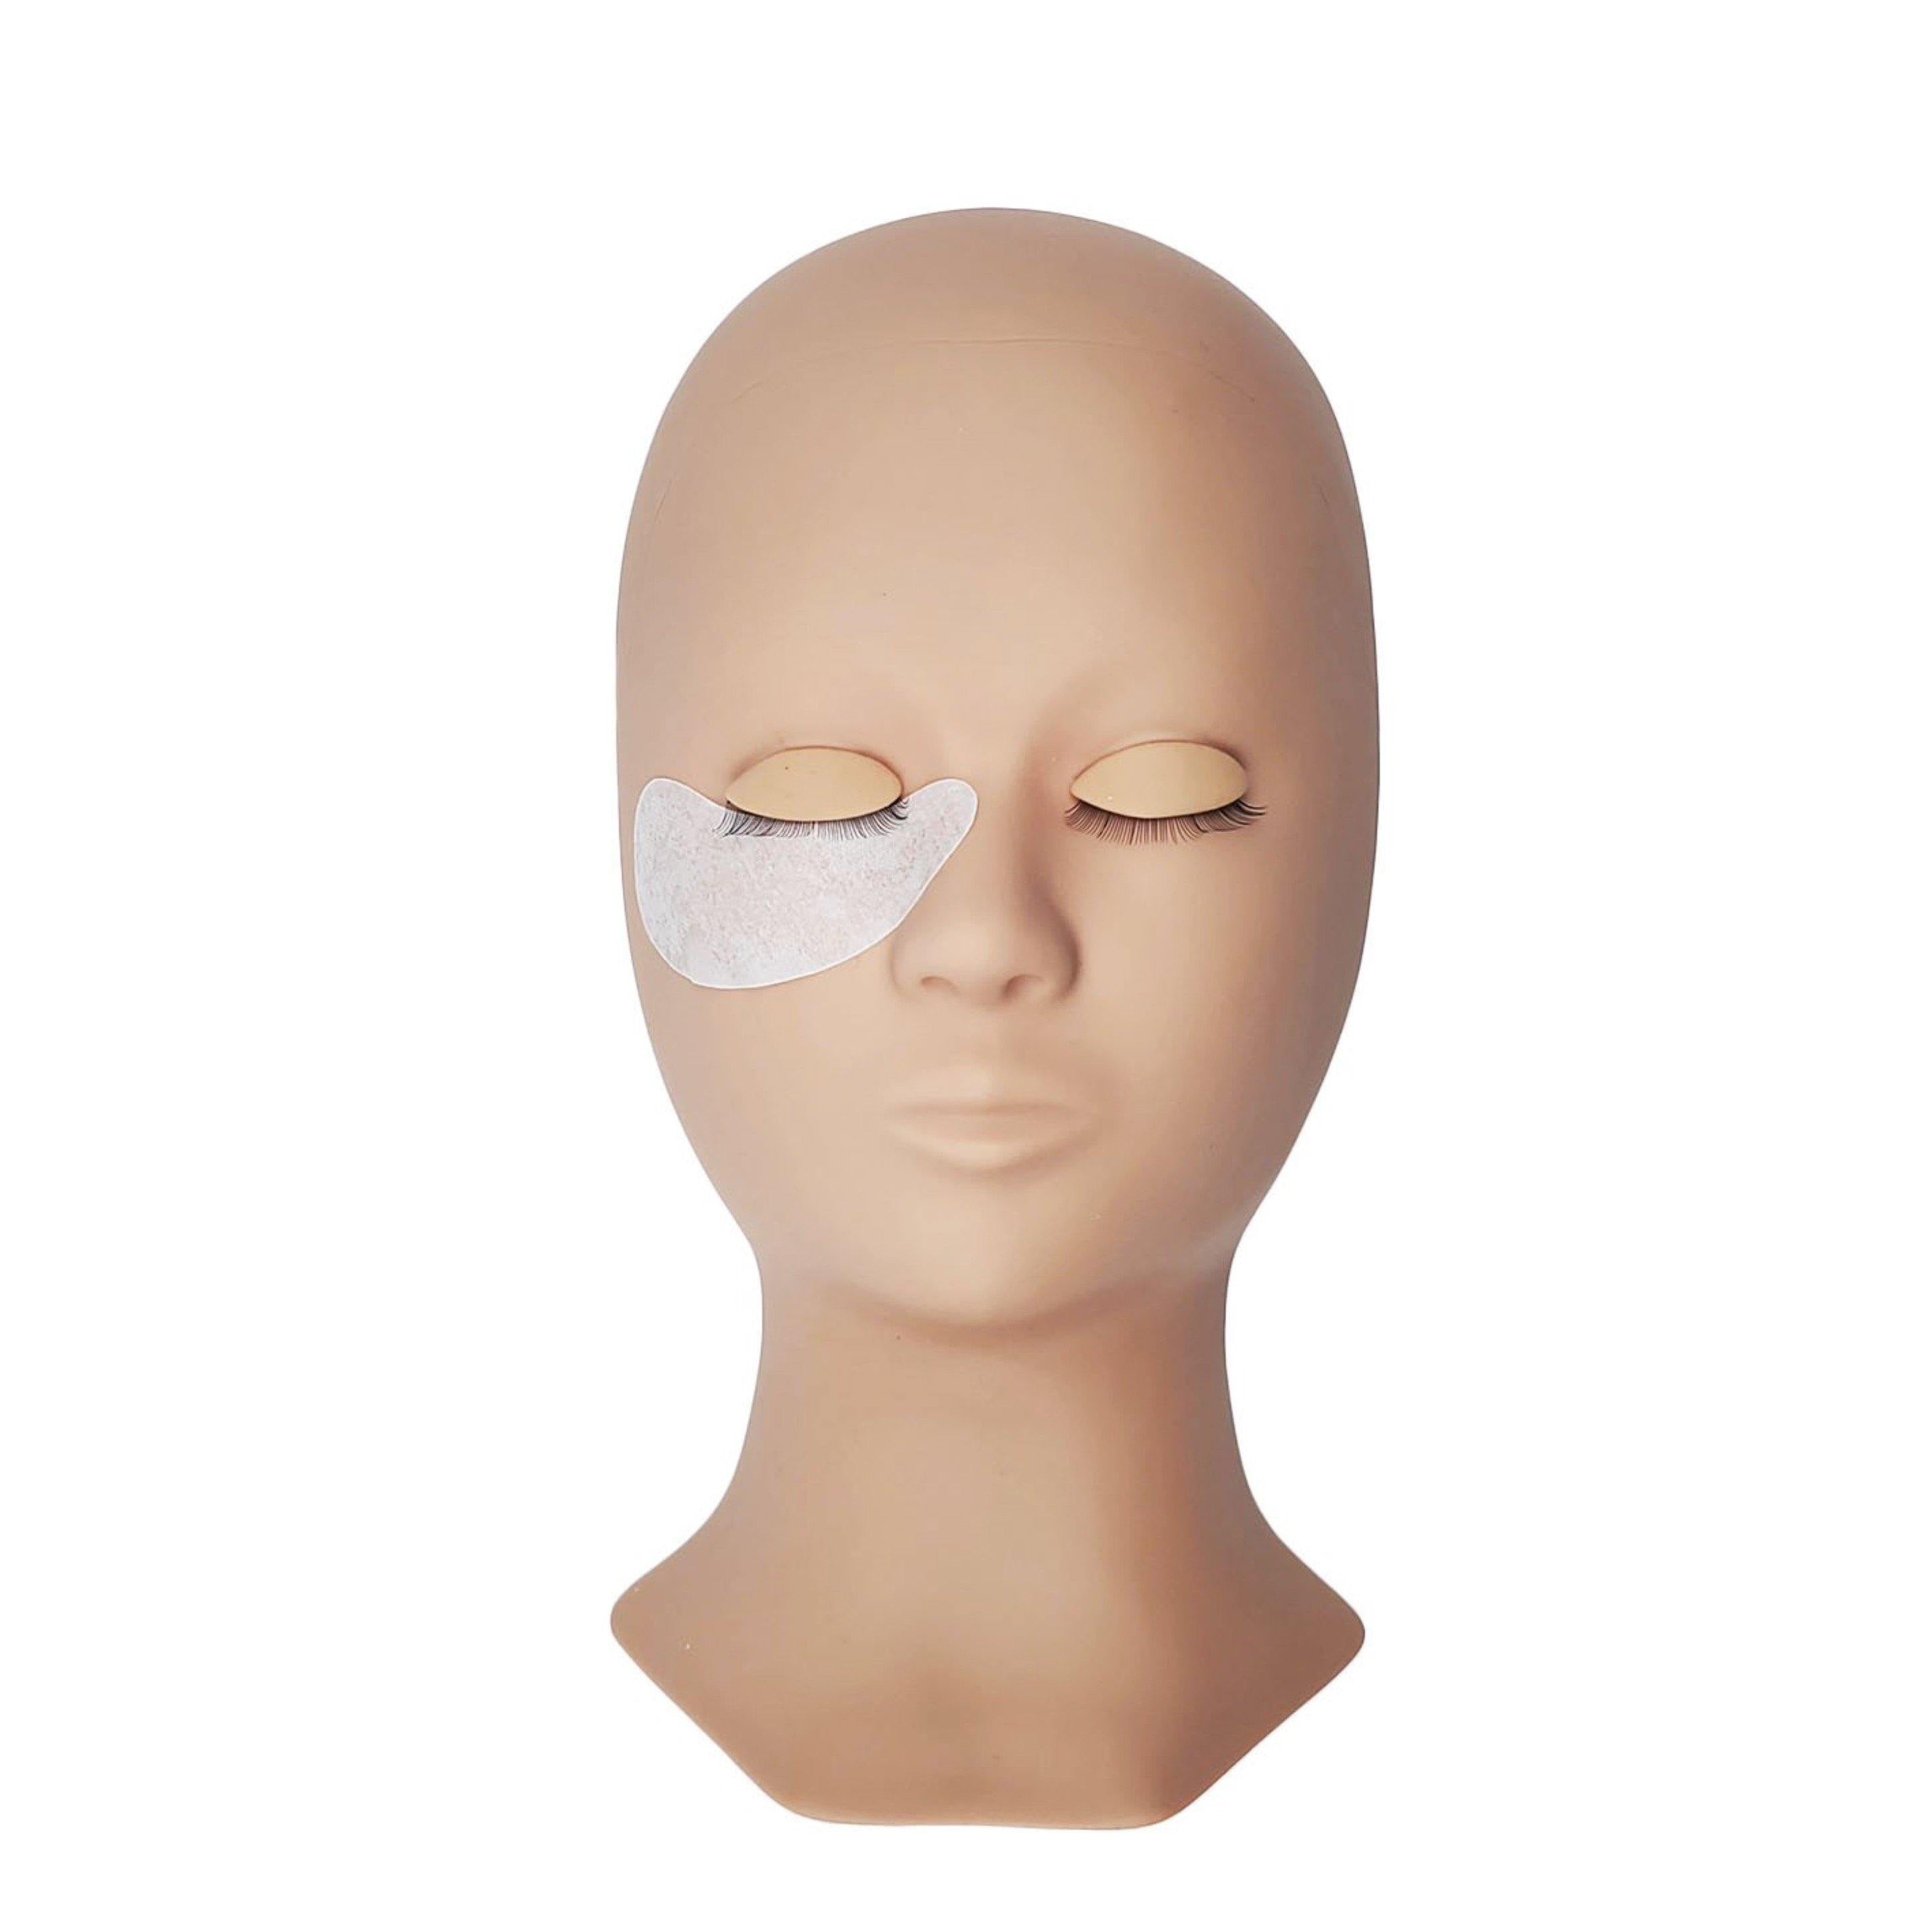 Mannequin head with one gel pad